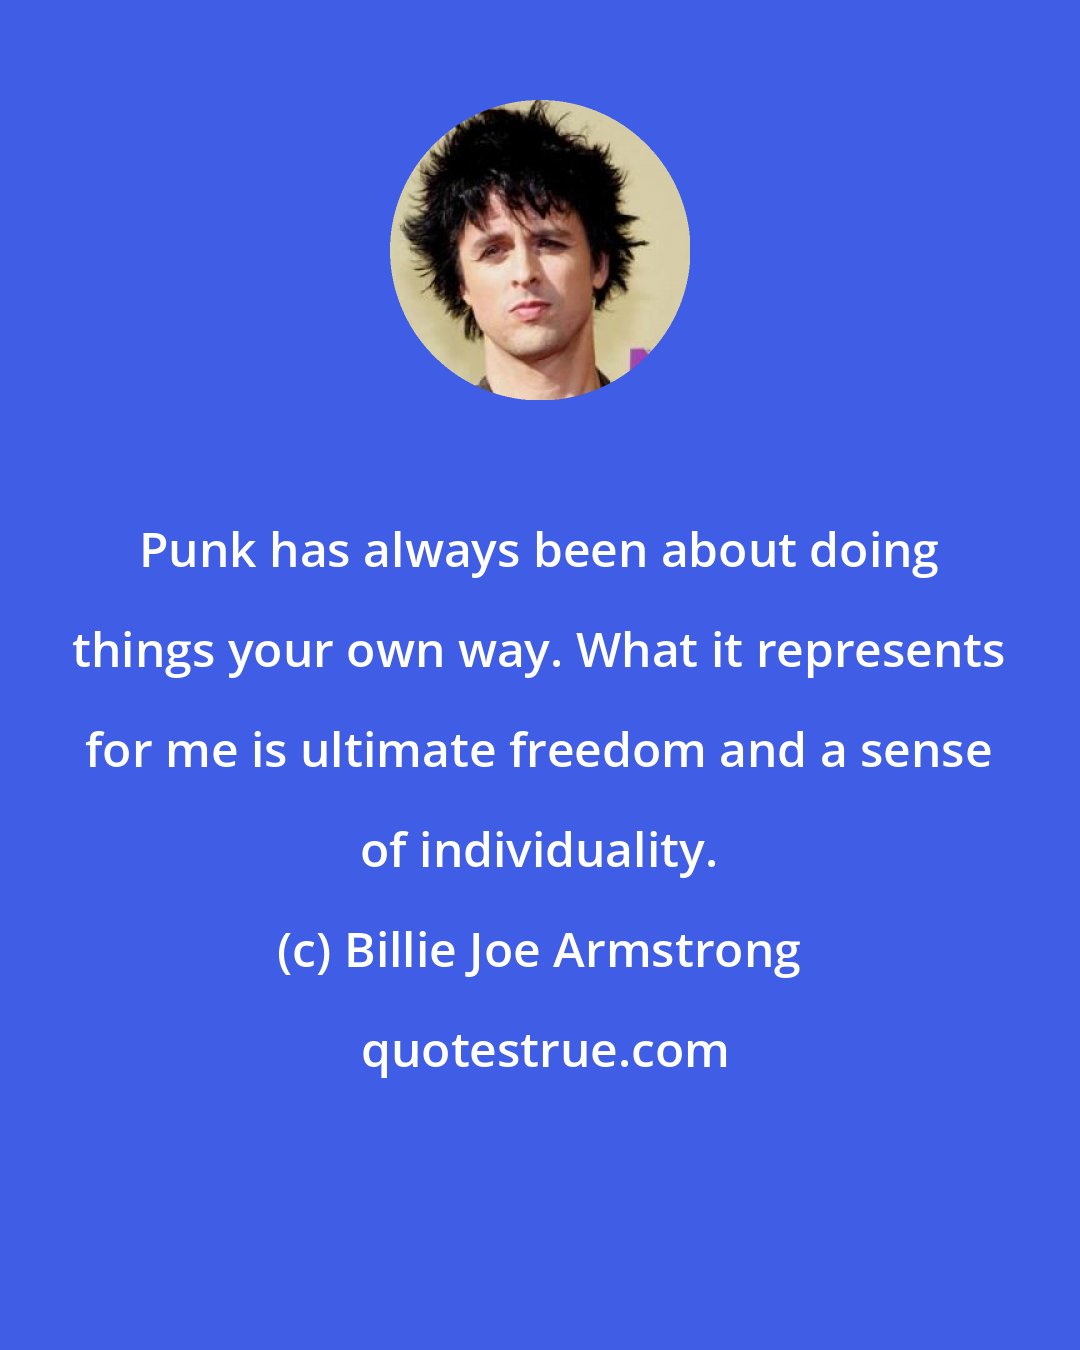 Billie Joe Armstrong: Punk has always been about doing things your own way. What it represents for me is ultimate freedom and a sense of individuality.